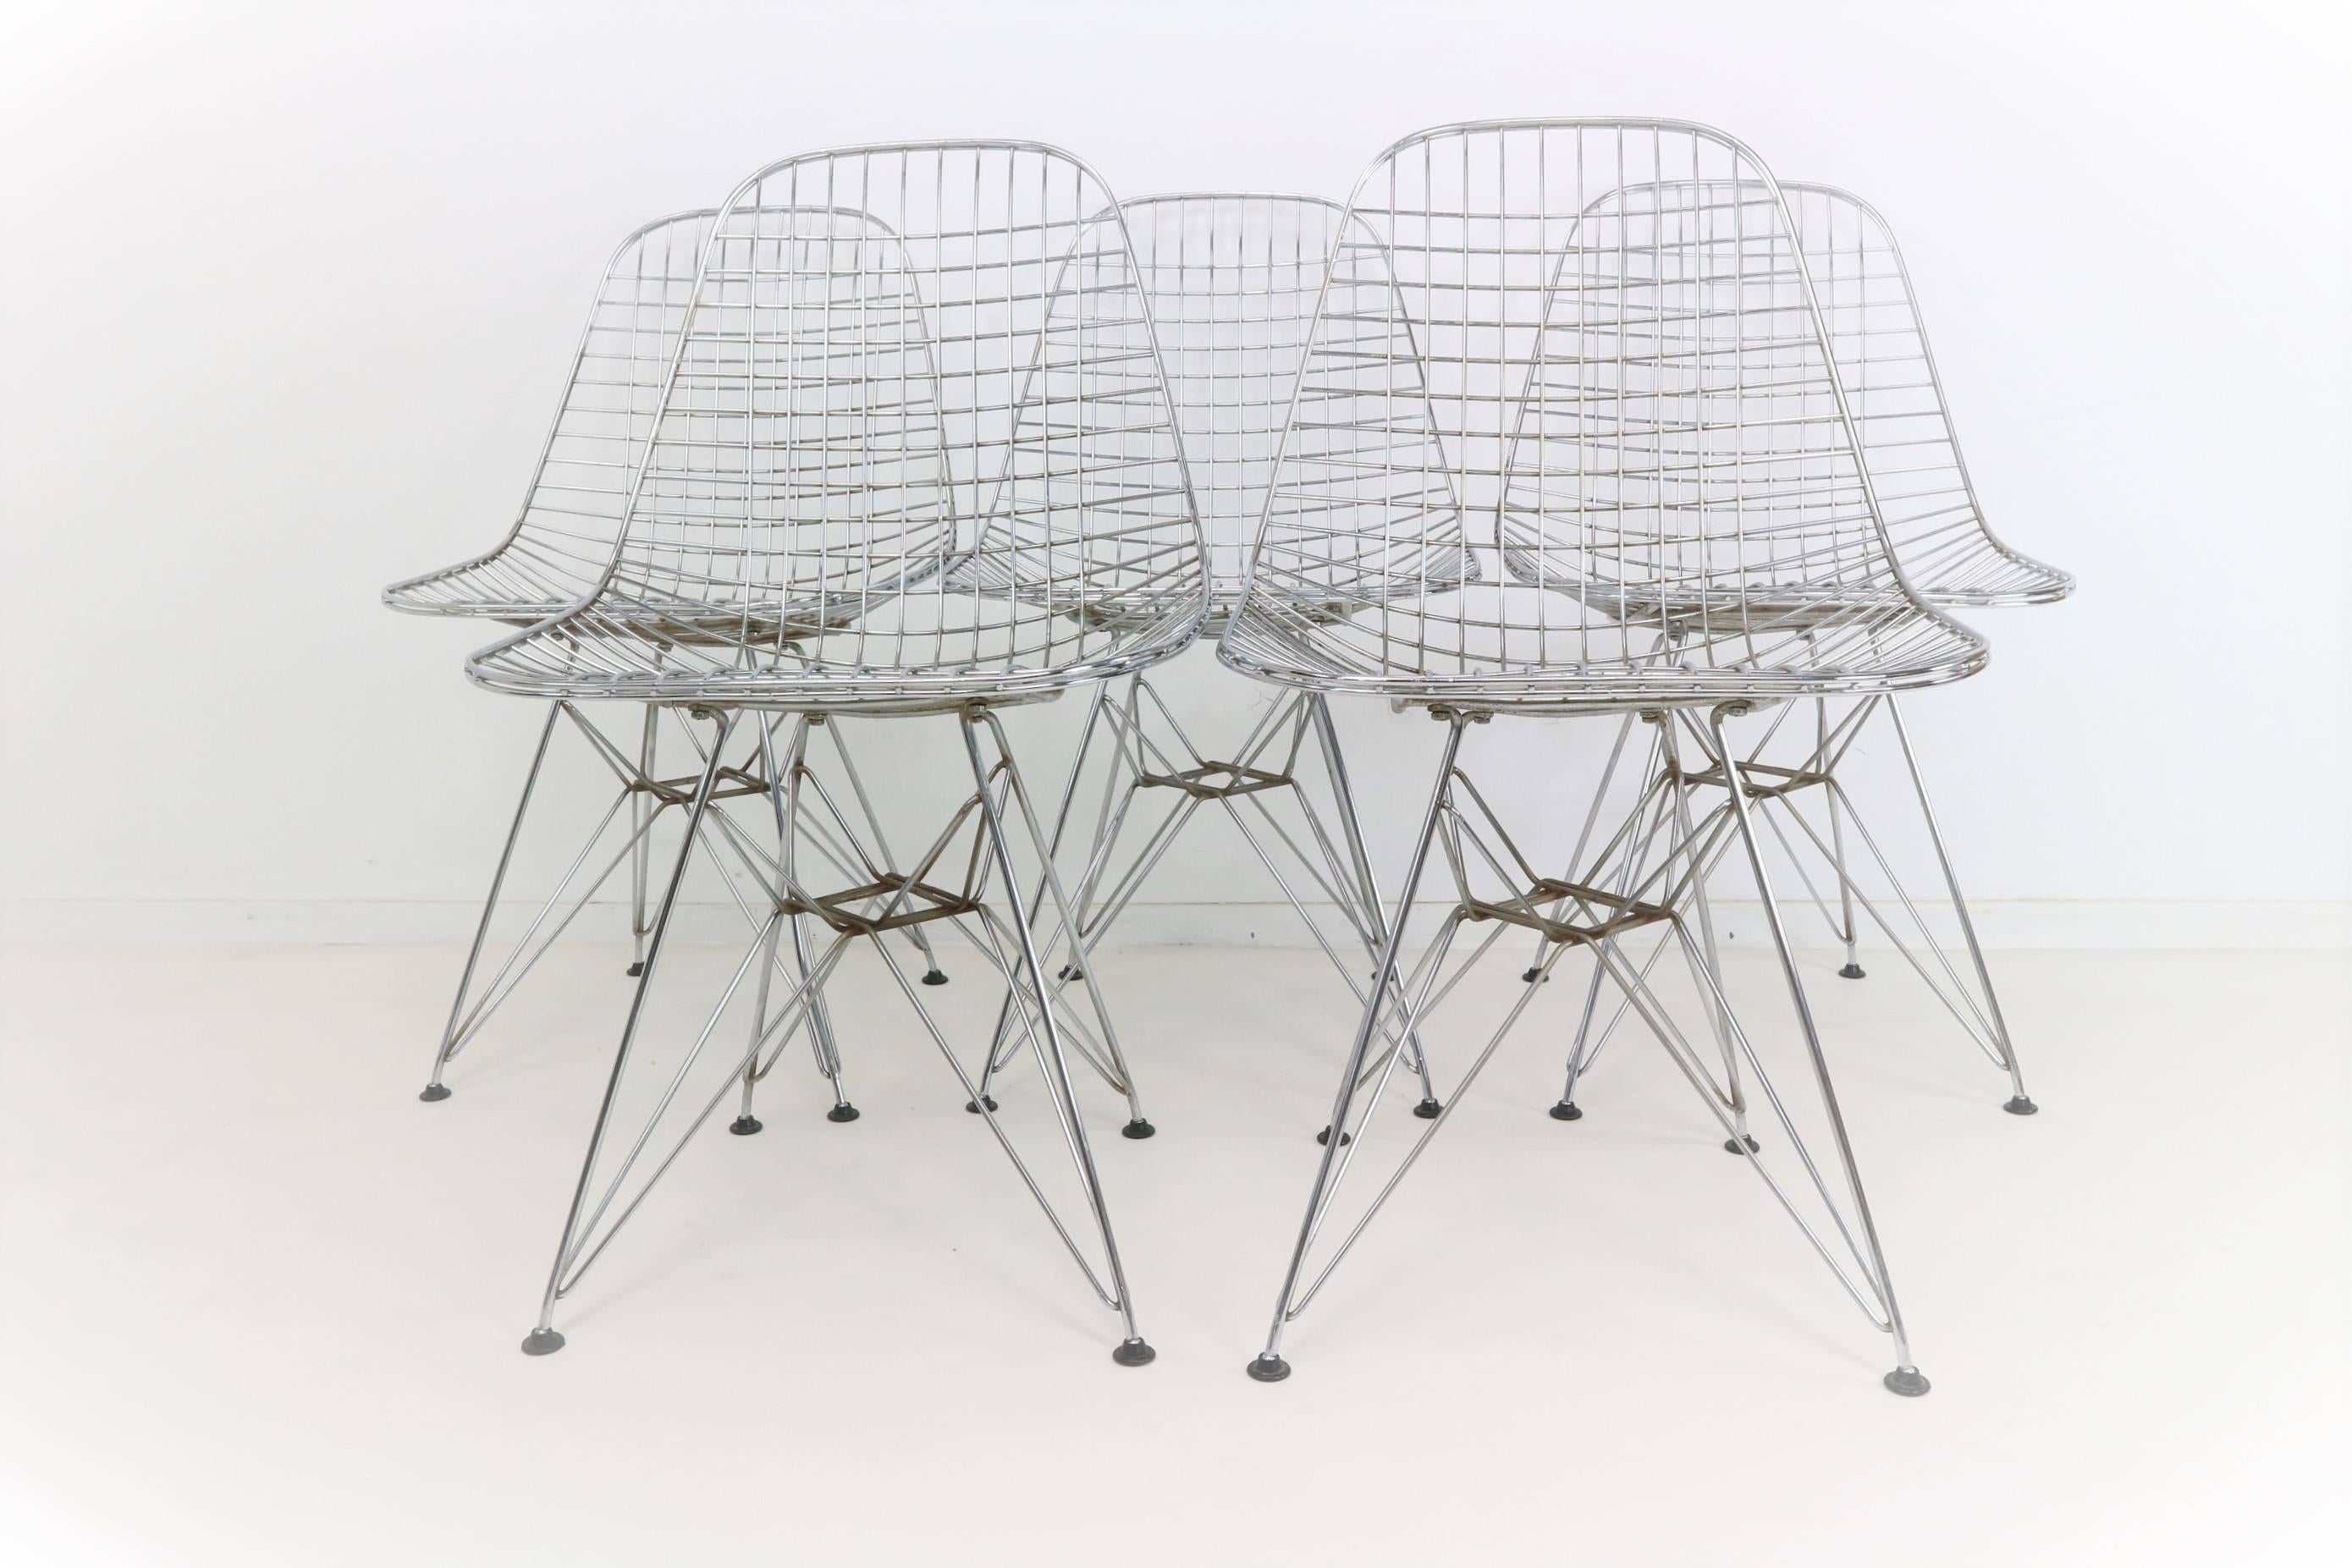 This model DKR-2 chair was designed in the 1950s by Ray & Charles Eames for Herman Miller and produced by Vitra. It is made from chrome-plated steel wire with a four-legged steel base known as an Eiffel Tower base.